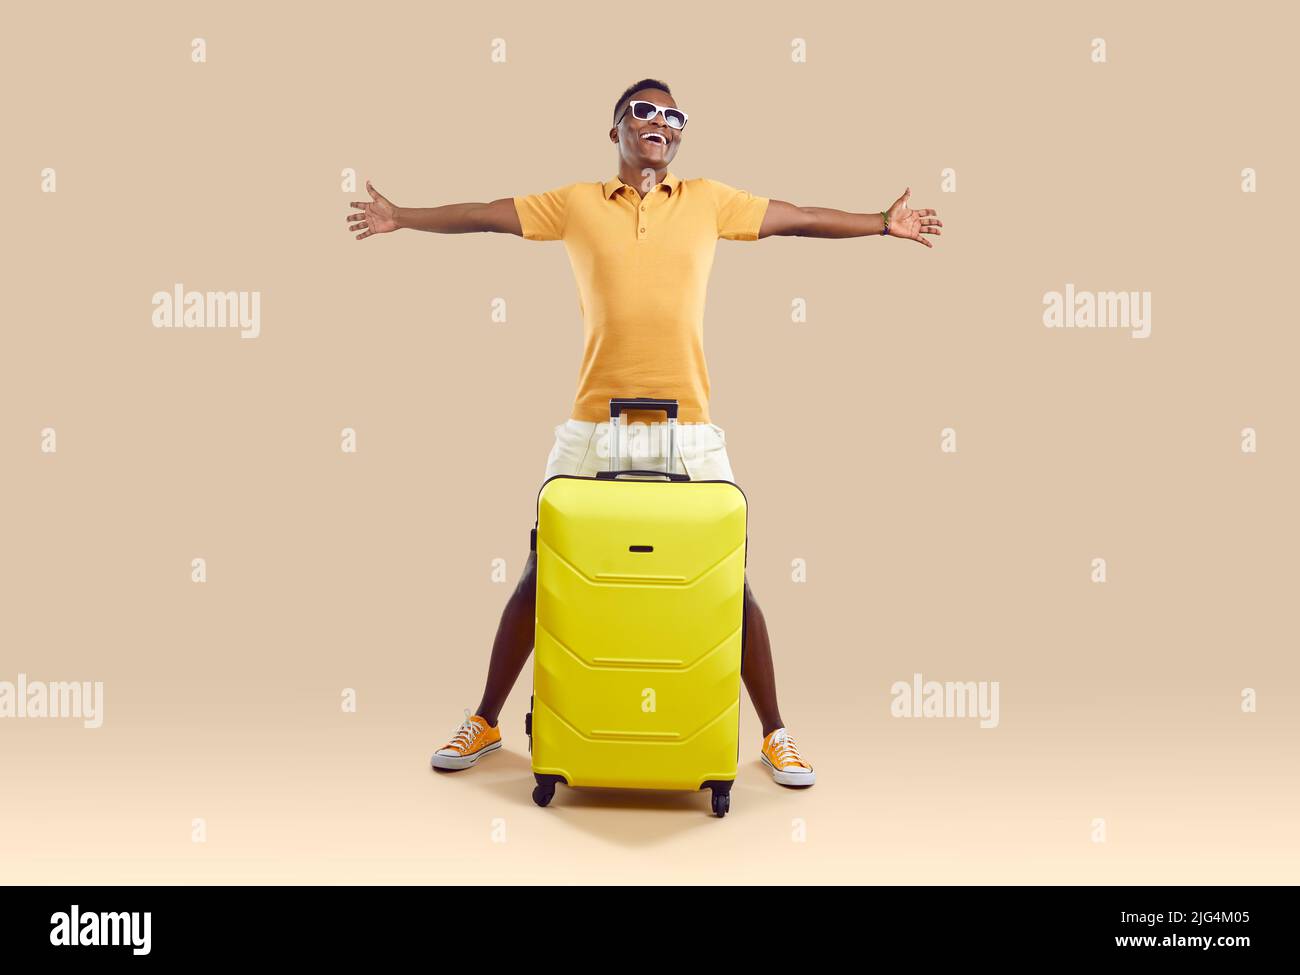 Overjoyed biracial man with suitcase ready for vacation Stock Photo